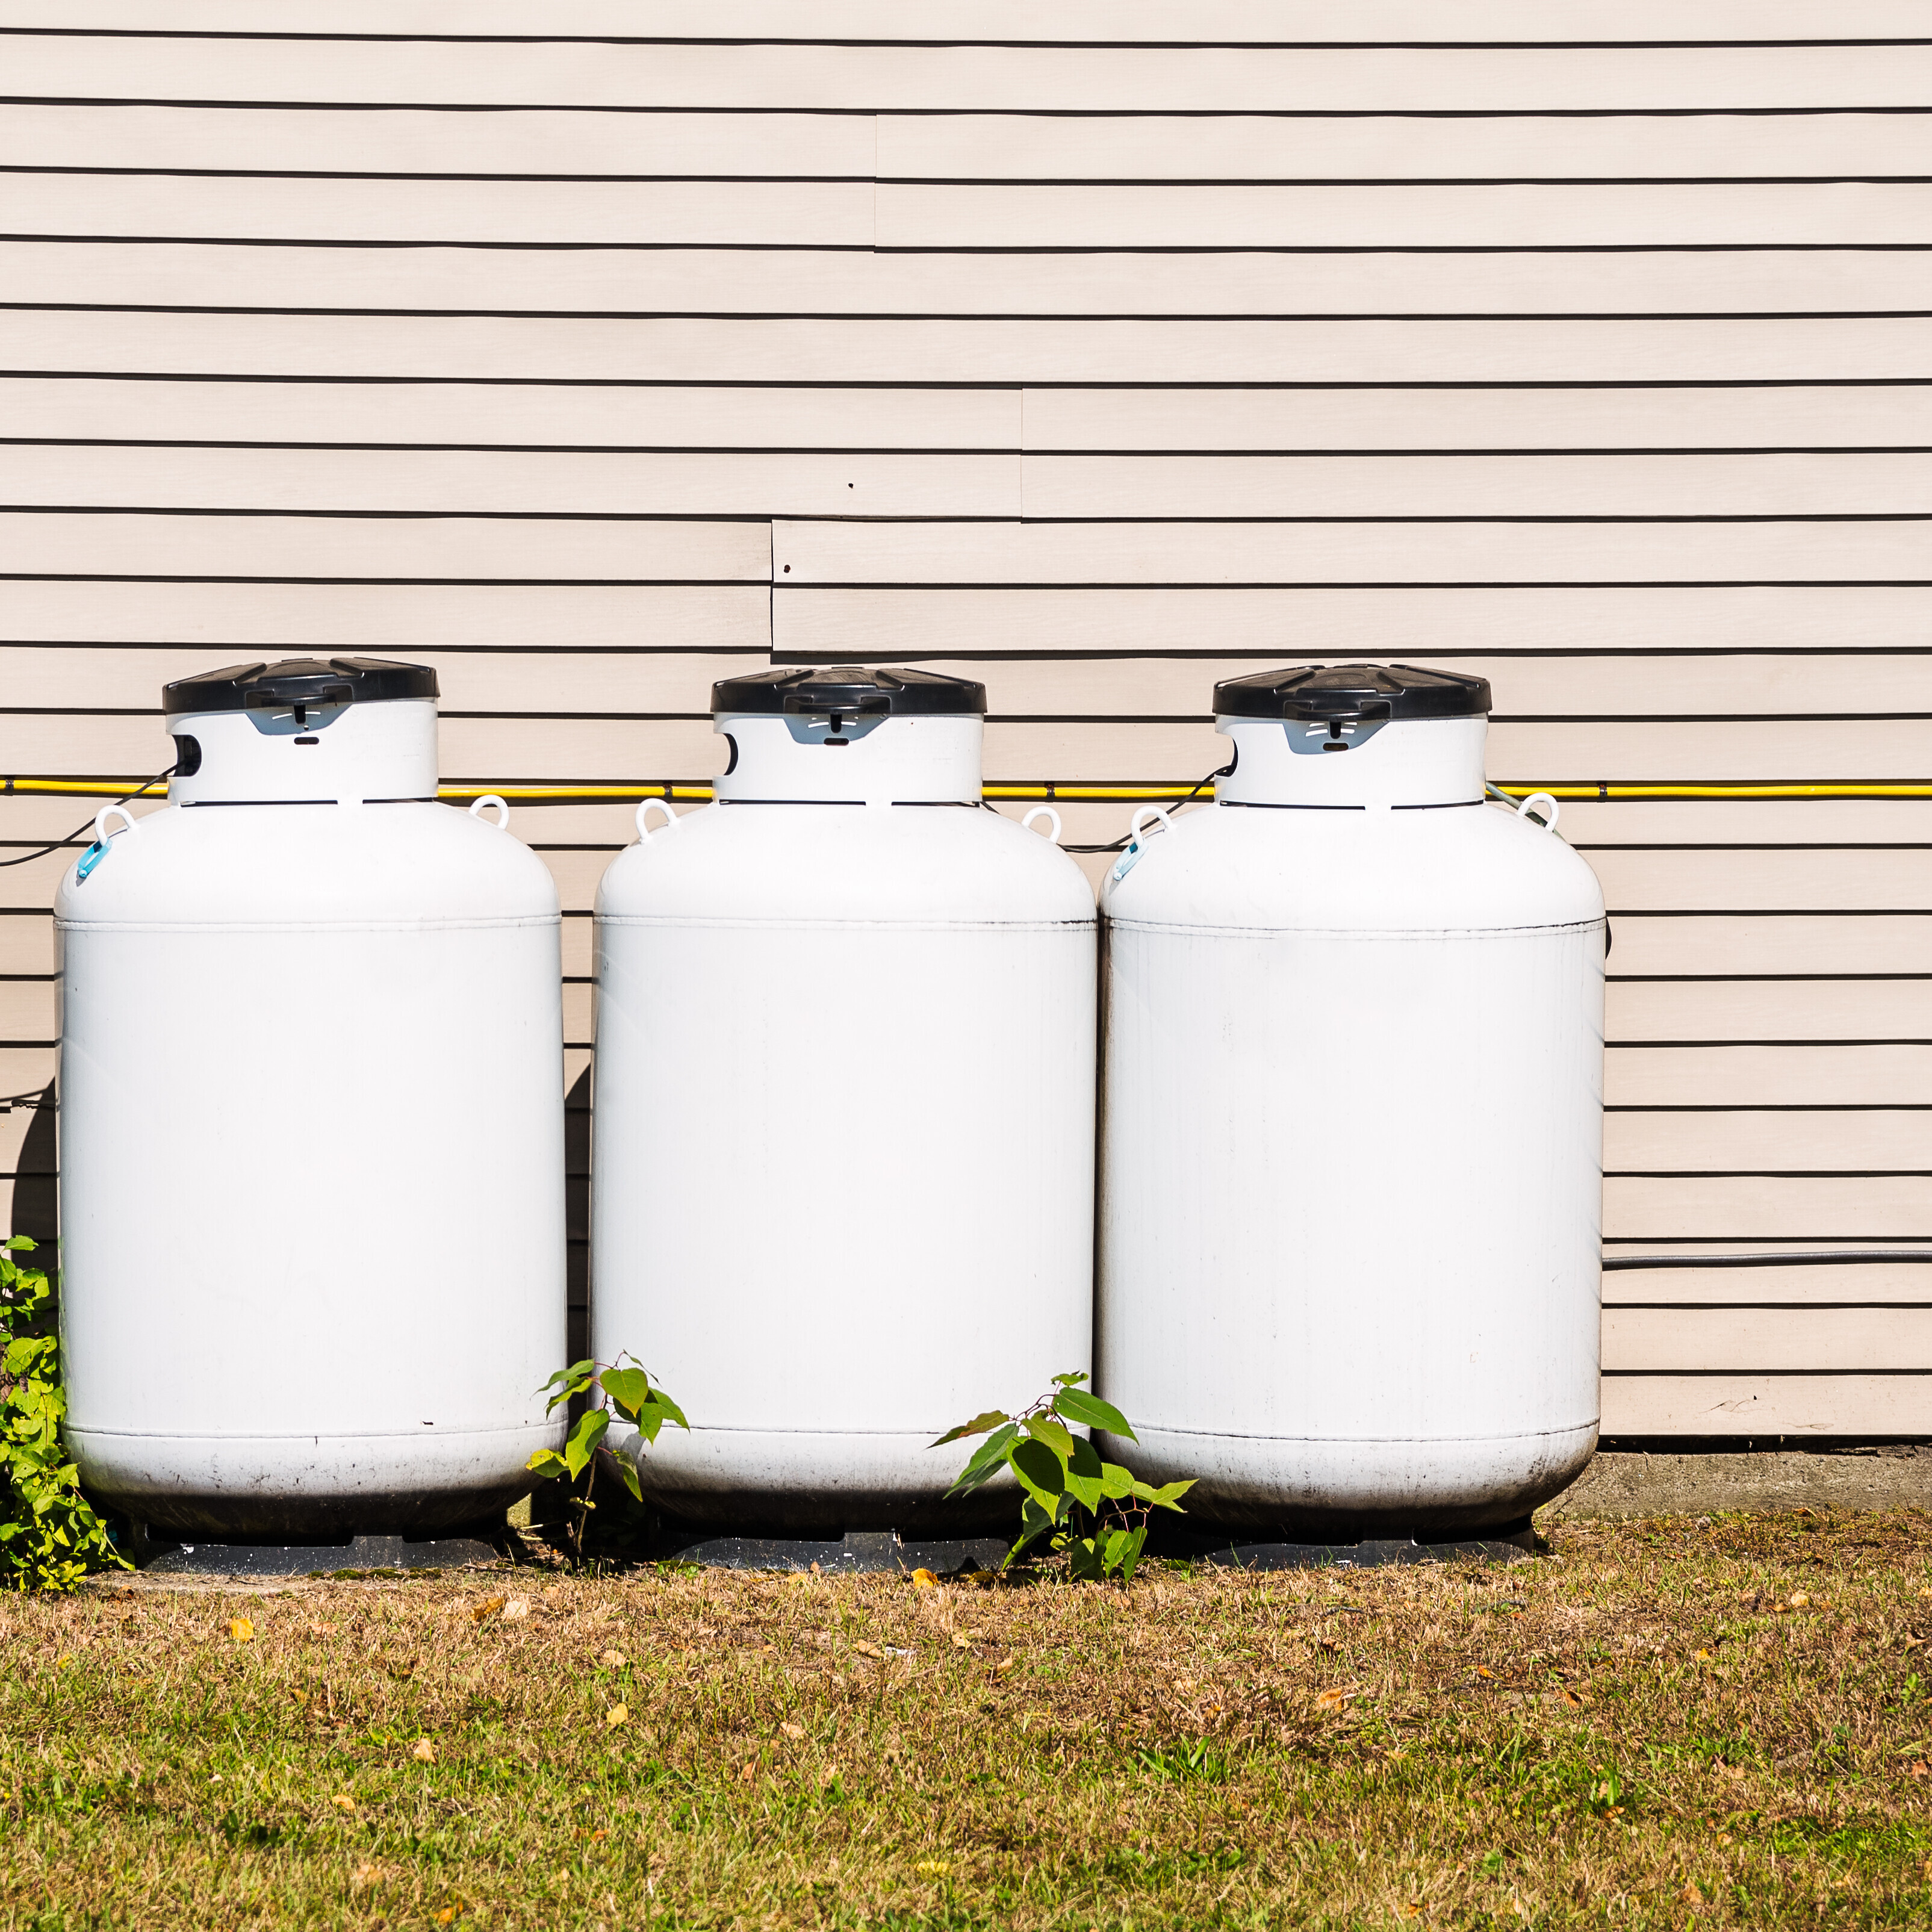 Row of propane tanks along the outside of a building